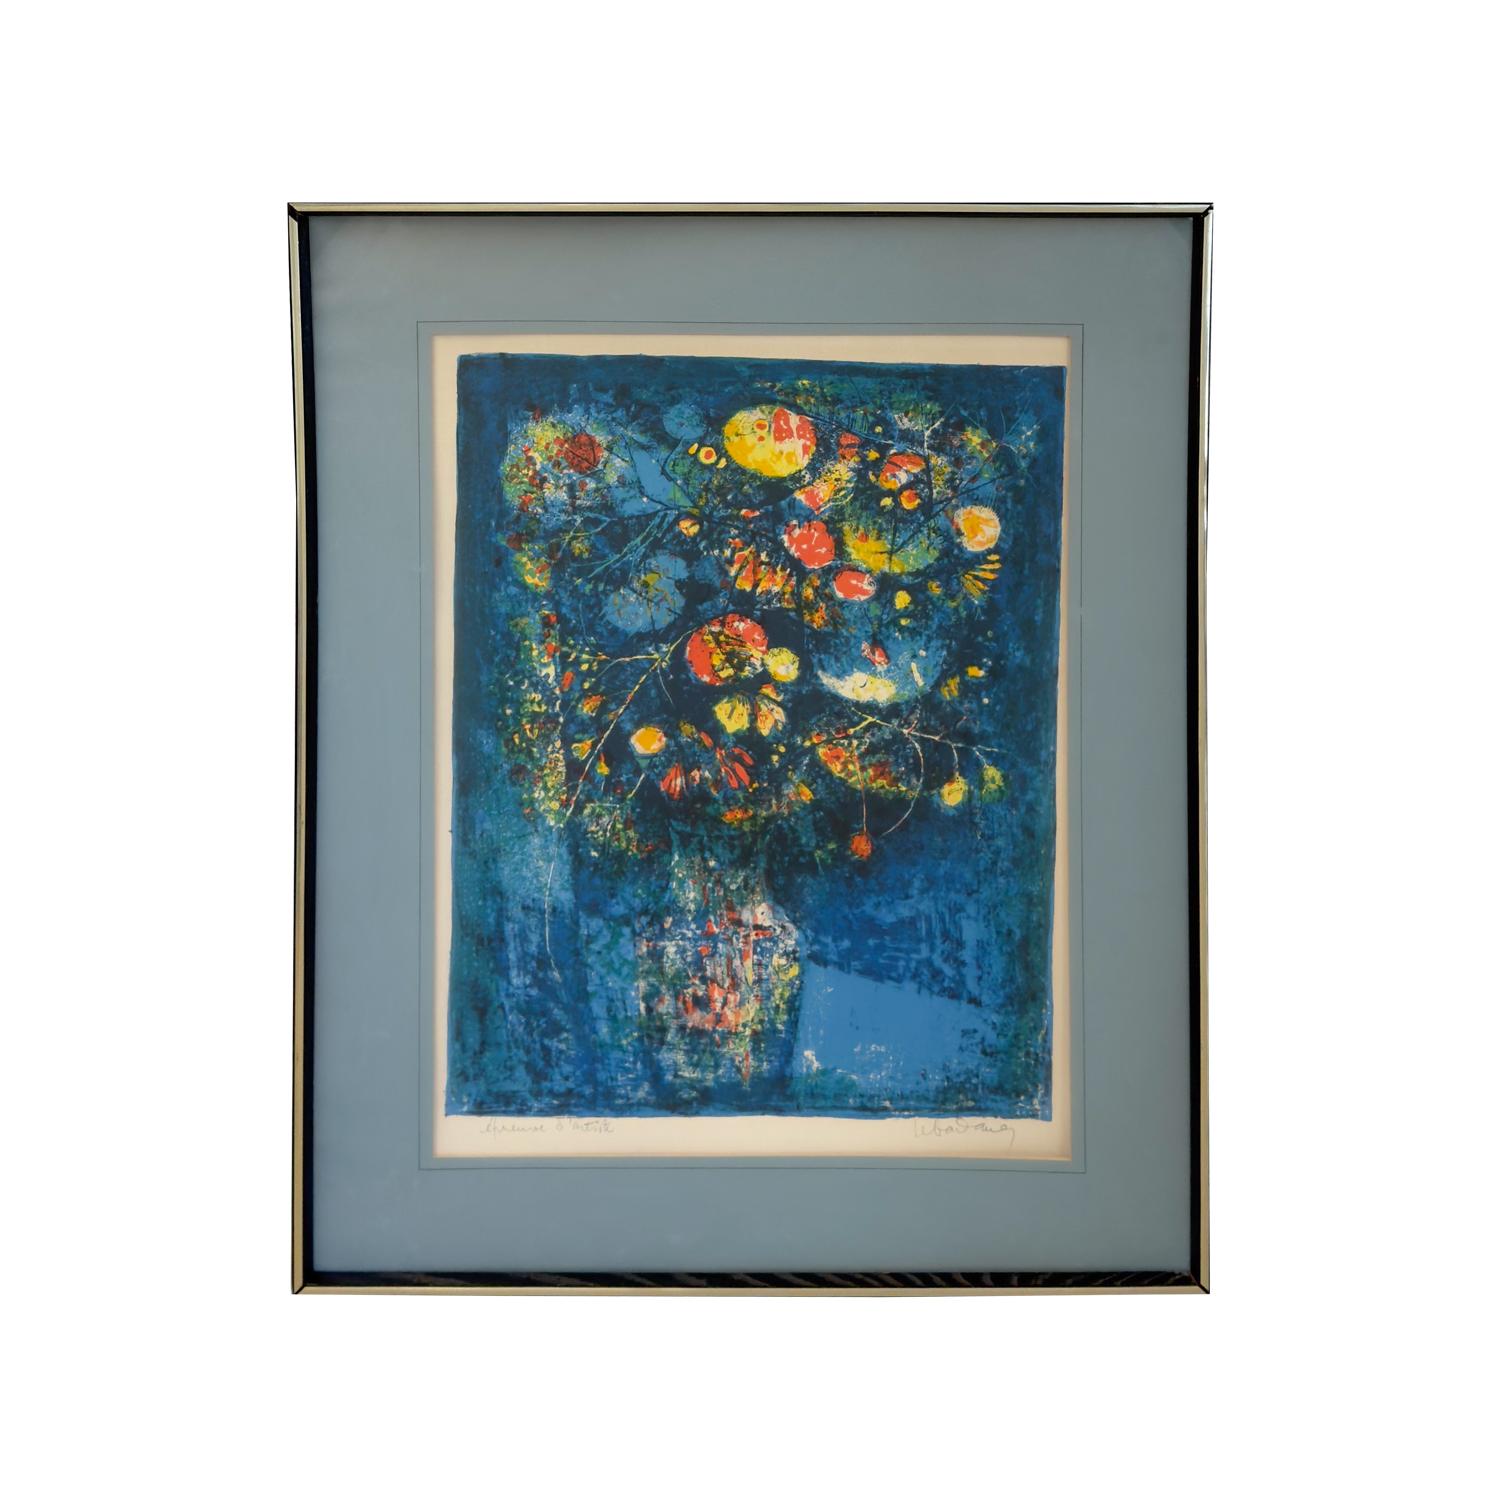 A floral still life lithograph by the renowned artist Hoi Lebadang (Vietnamese/ French 1922- 2015).  In this exquisite art work, Lebadang captures the essence of nature's beauty with precision and grace. A vibrant bouquet of flowers gracefully